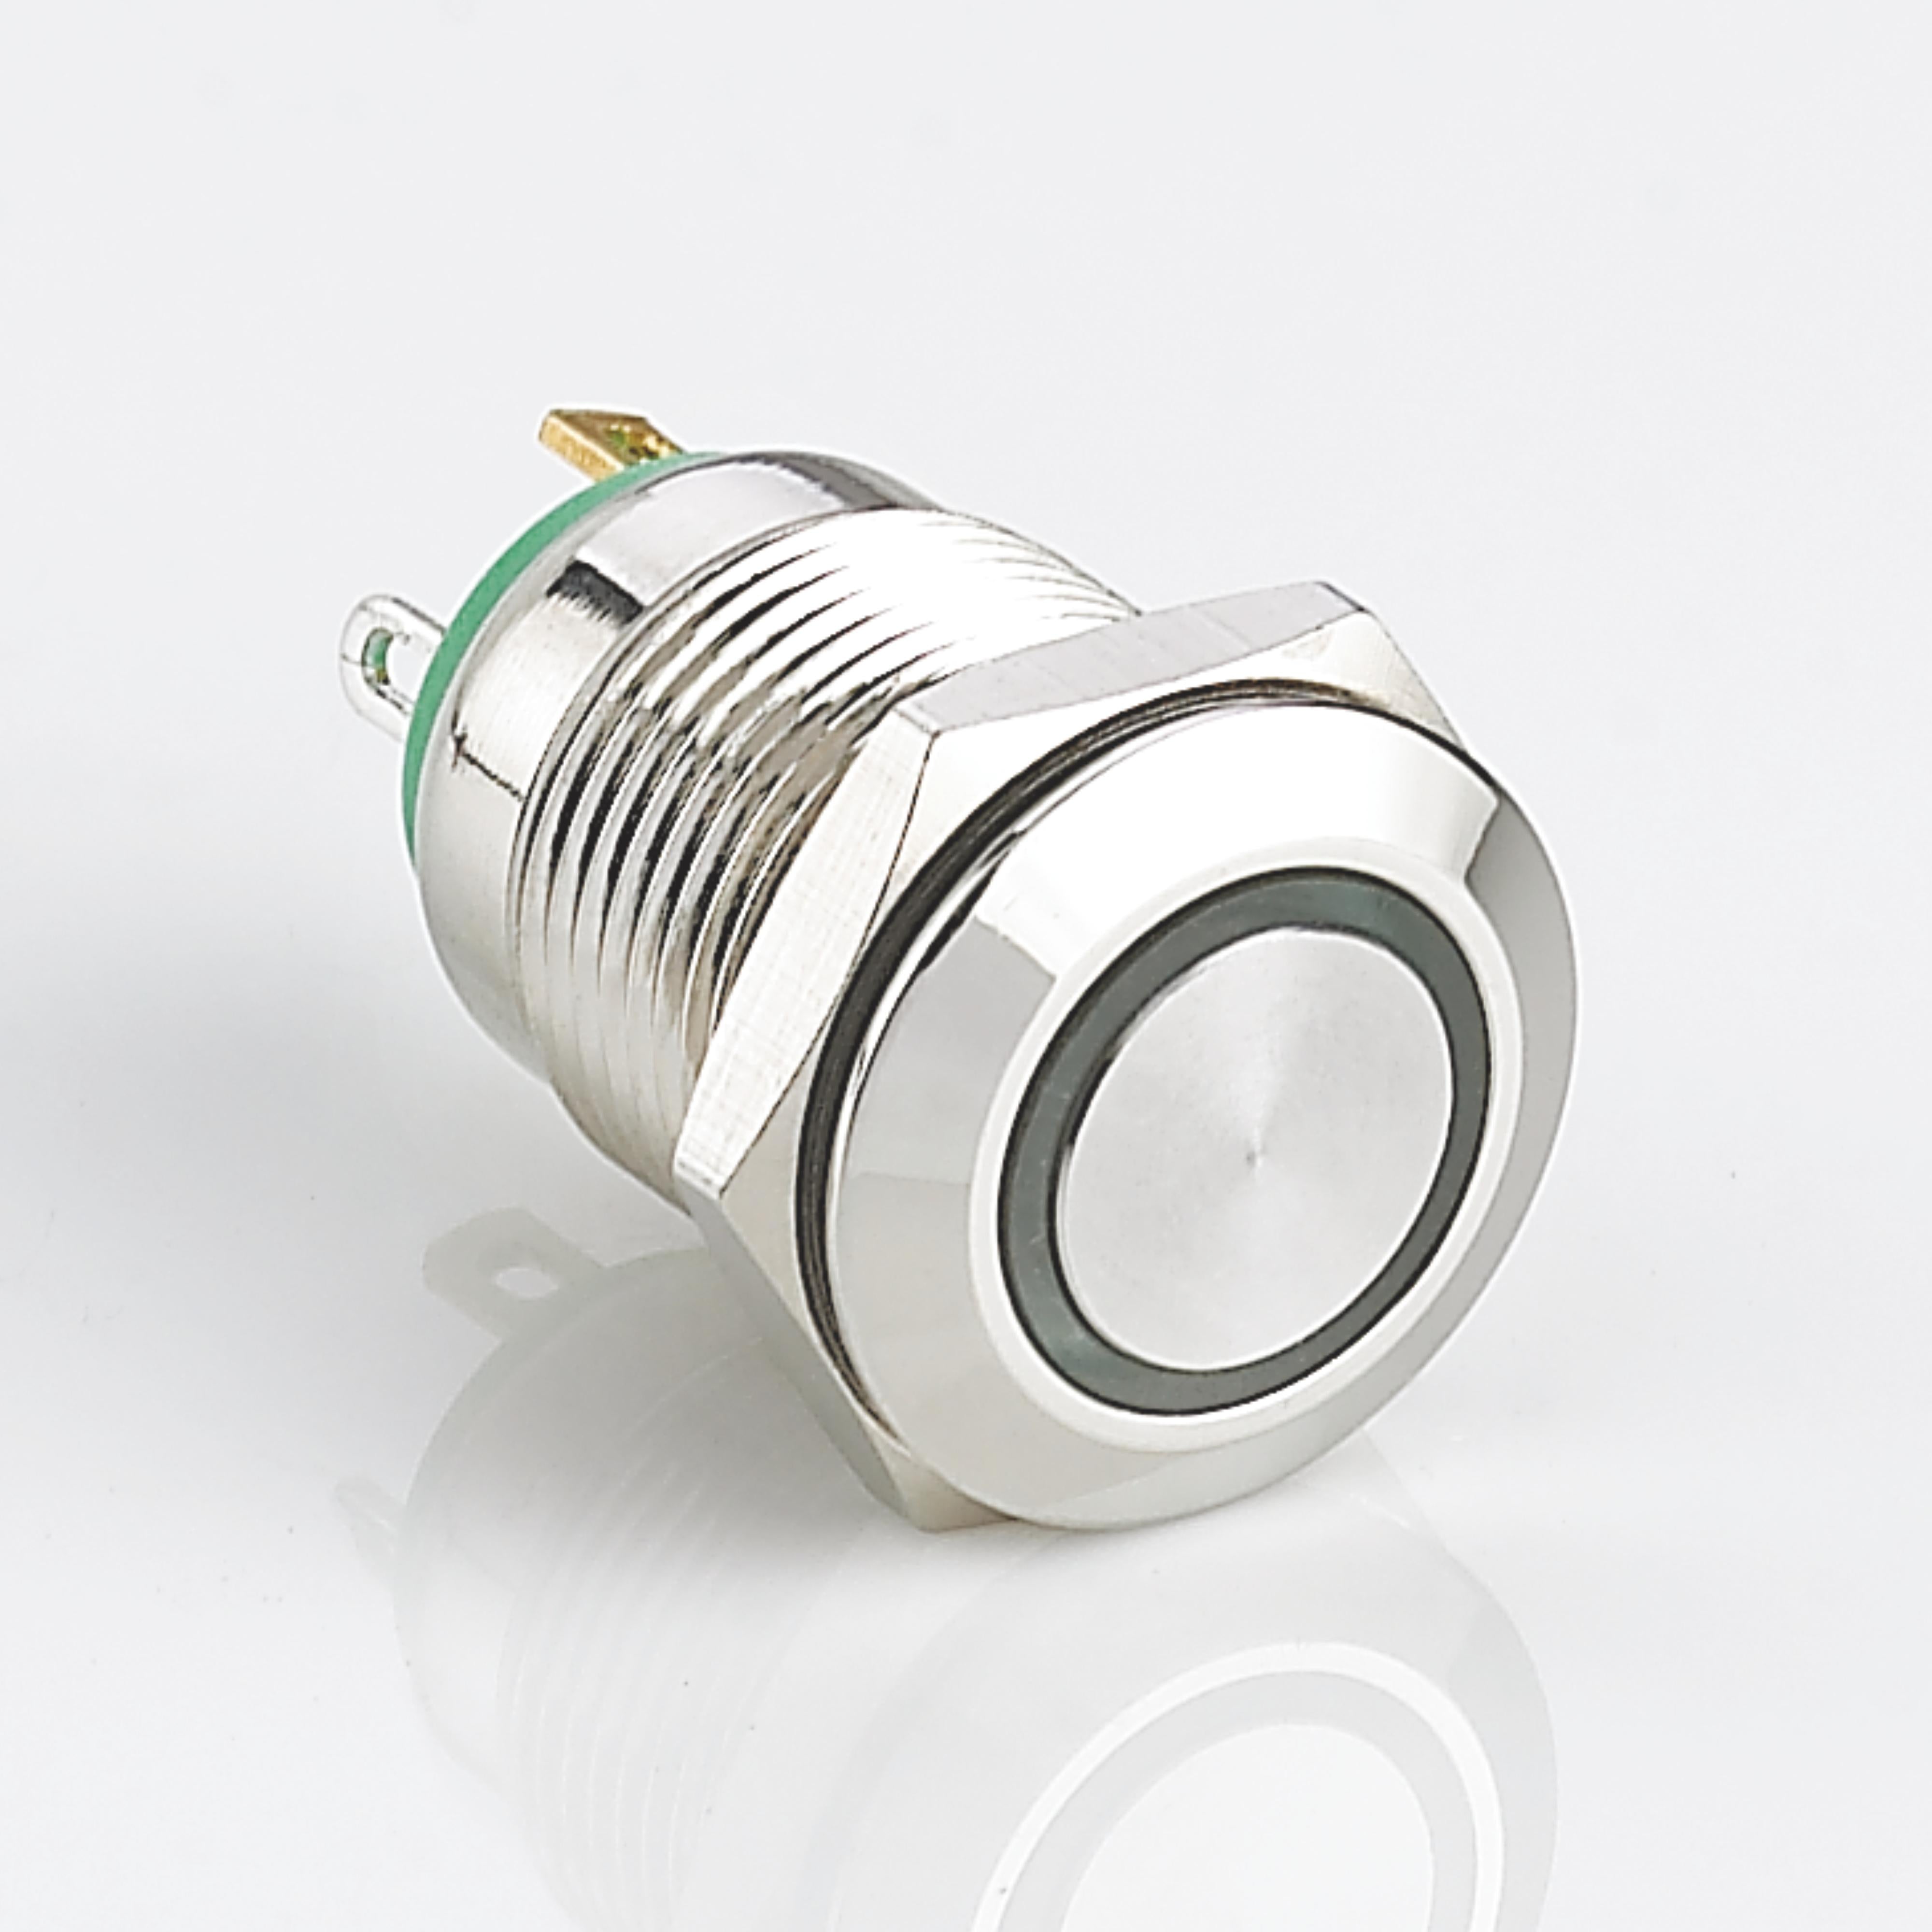 12mm Waterproof Metal Push Button Switch Ring LED Momentary Flat Head Stainless Steel Soldering Pin 1 Normally-Open